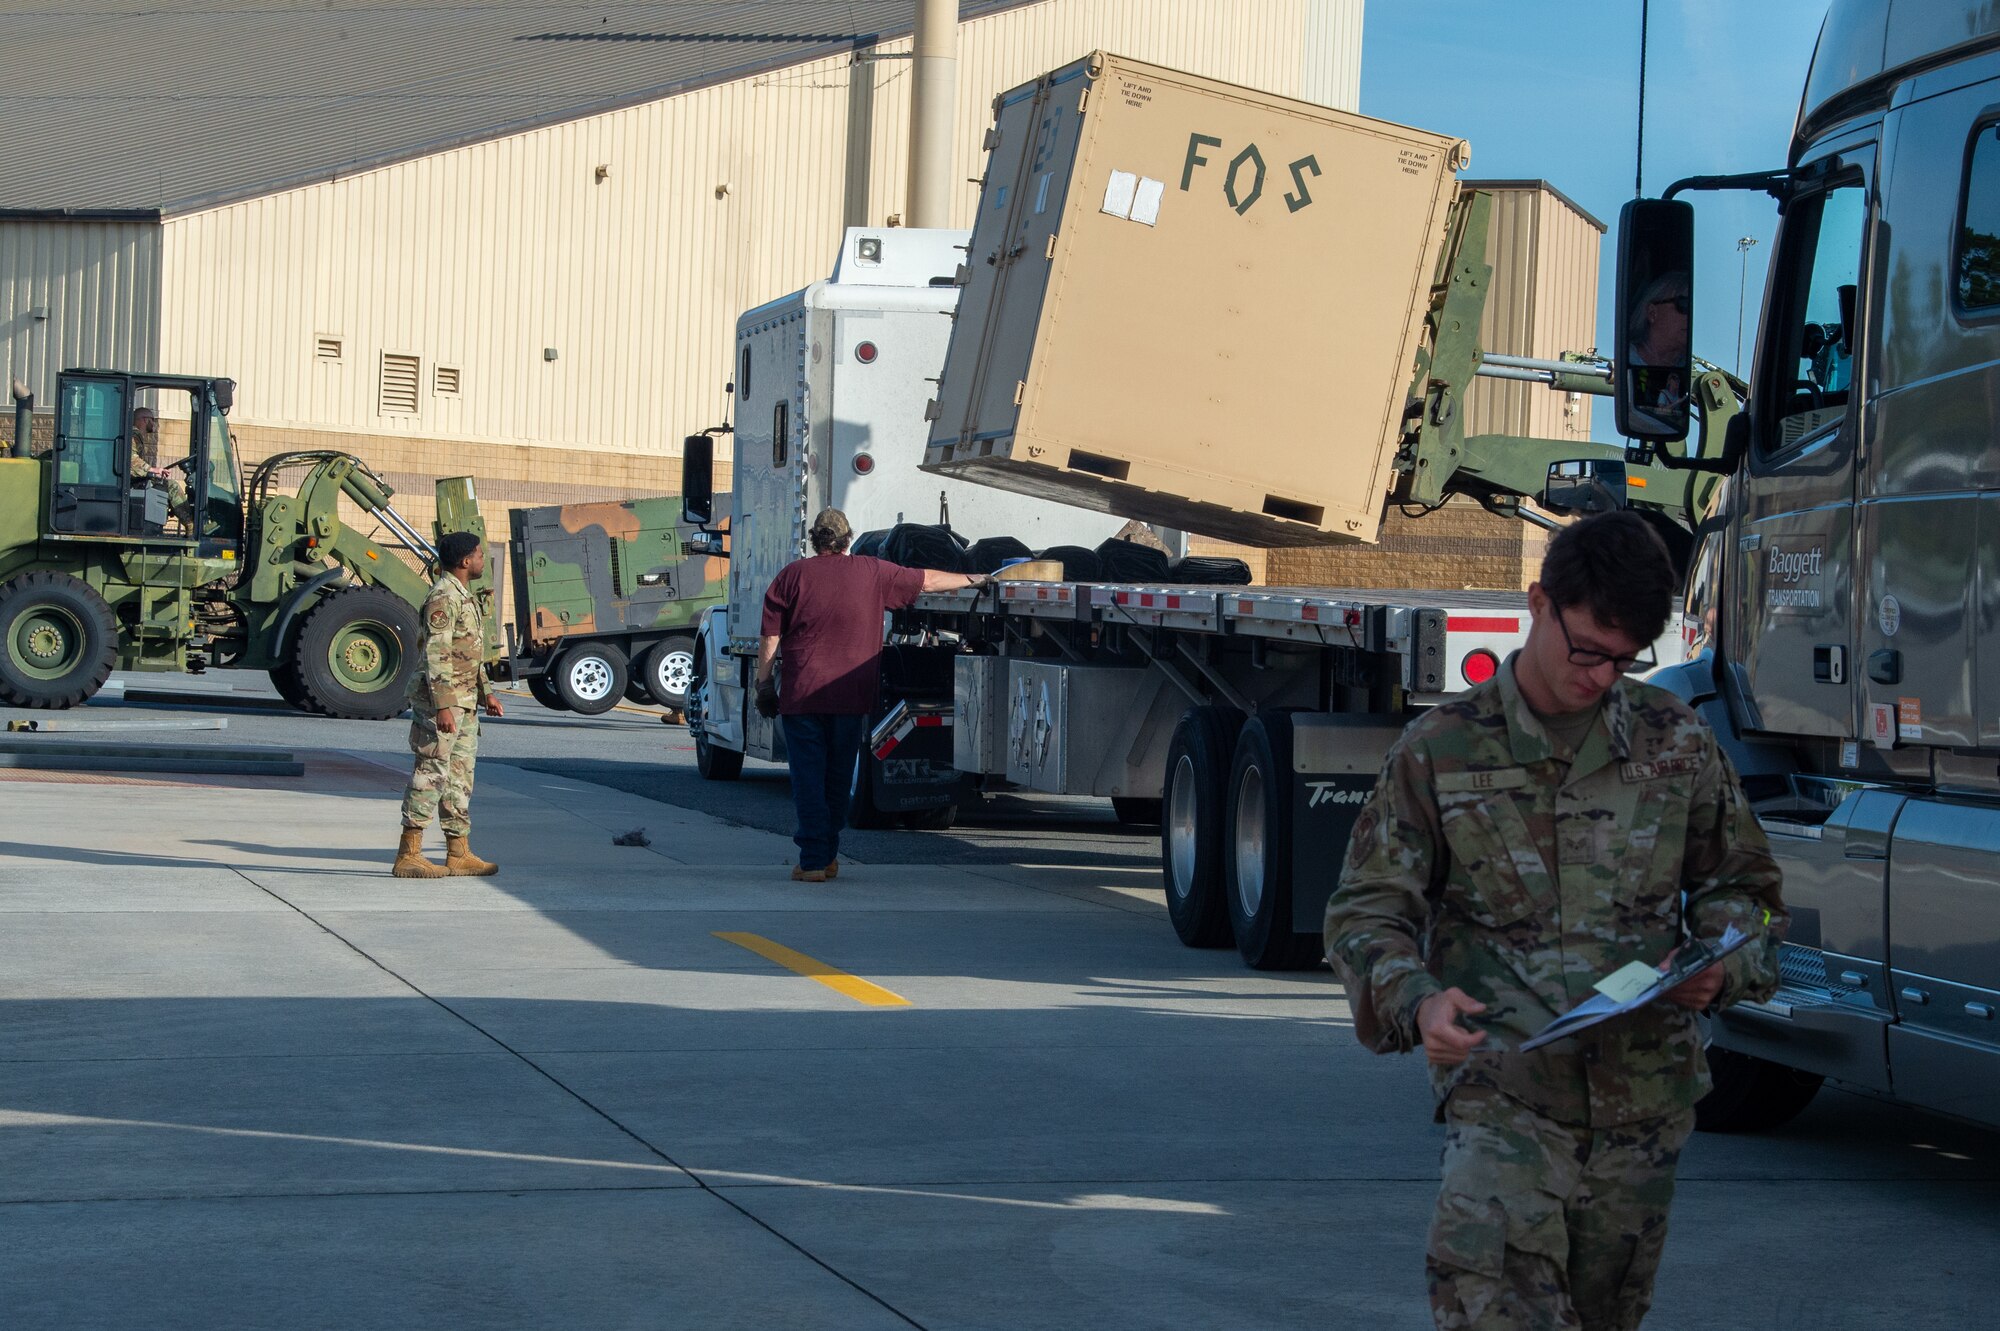 U.S. Air Force Senior Airman Lee, assigned to the 23rd Logistics Readiness Squadron, looks over documents while equipment is being loaded for Exercise Ready Tiger 24-1 at Moody Air Force Base, Georgia, April 8, 2024. The trucks were being used to assist in the transportation of supplies to various exercise locations.  The Ready Tiger 24-1 exercise evaluators will assess the 23rd Wing's proficiency in employing decentralized command and control to fulfill air tasking orders across geographically dispersed areas amid communication challenges. (U.S. Air Force photo by Airman 1st Class Iain Stanley)